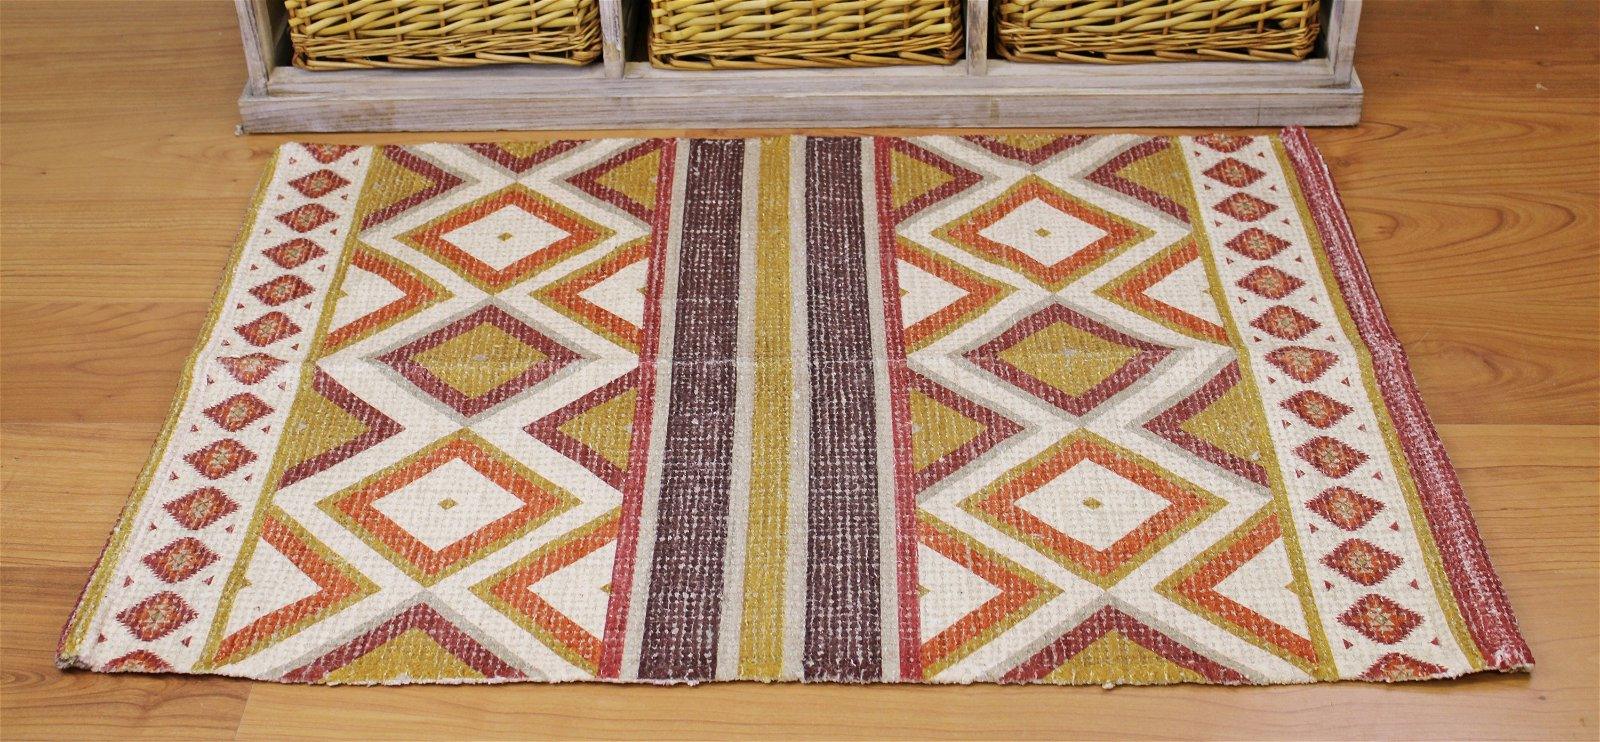 View Moroccan Inspired Kasbah Rug Diamonds and Stripes 60x90cm information